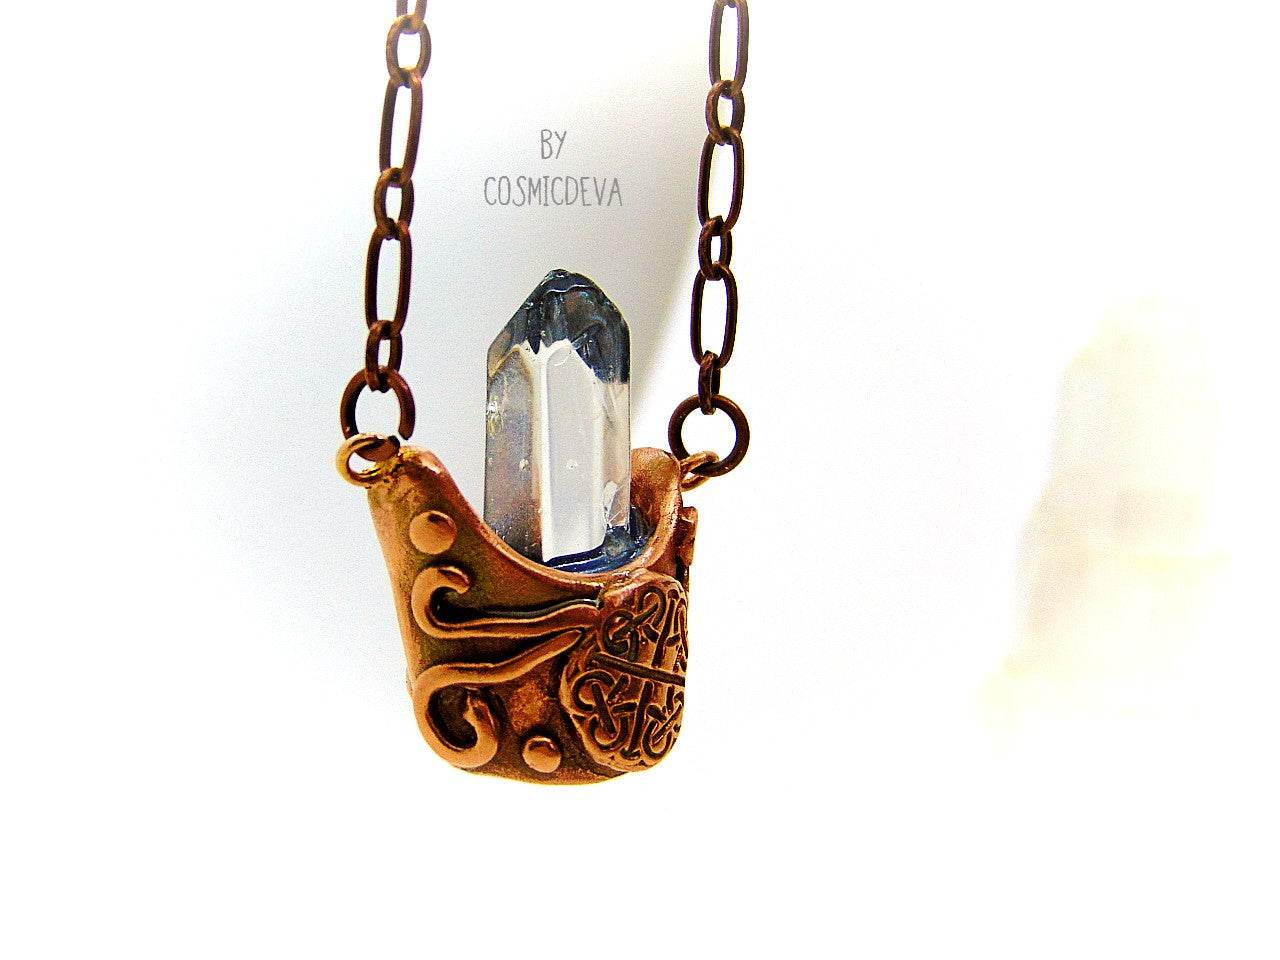 Adorable Wiccan Celtic style solid copper cauldron necklace with a clear Chrystal quartz point in the center. This witchy🧙‍♀️ cauldron pendant is completely hand formed from solid copper, kiln fired and polished with microcrystalline wax (Renaissance wax)